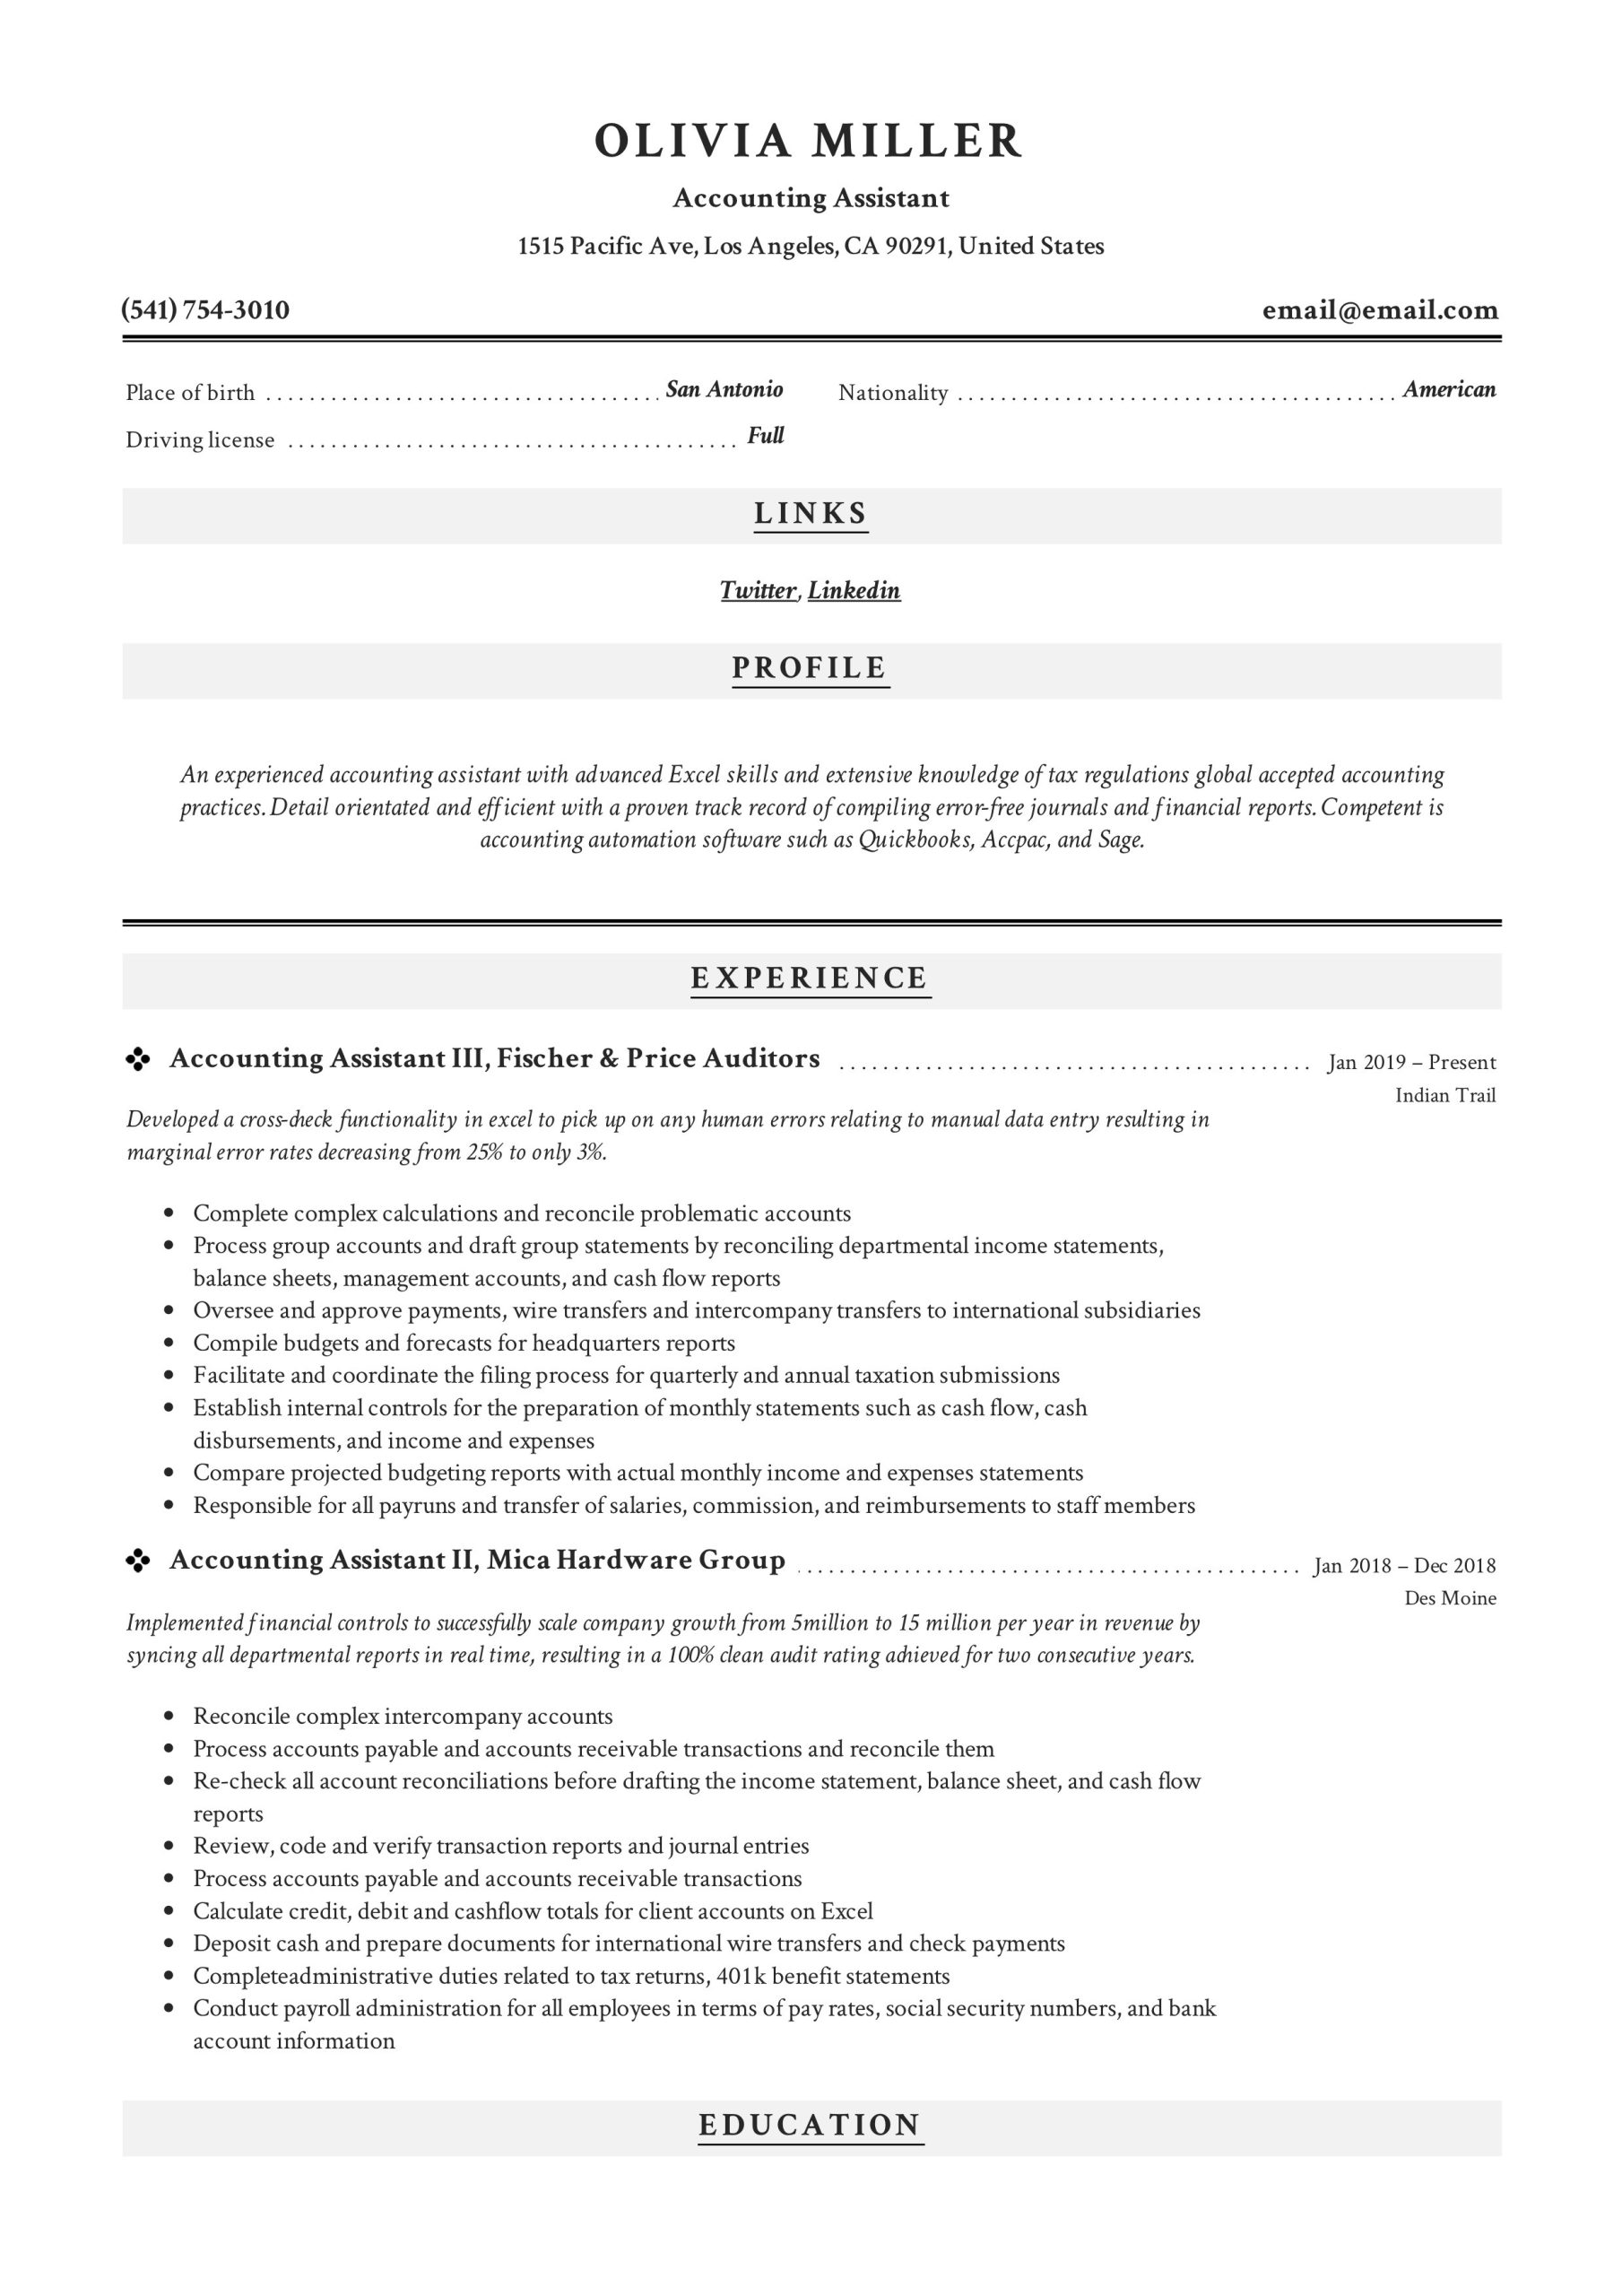 Sample Resume Objectives for Finance Jobs Accounting & Finance Resume Examples 2022 Free Pdf’s